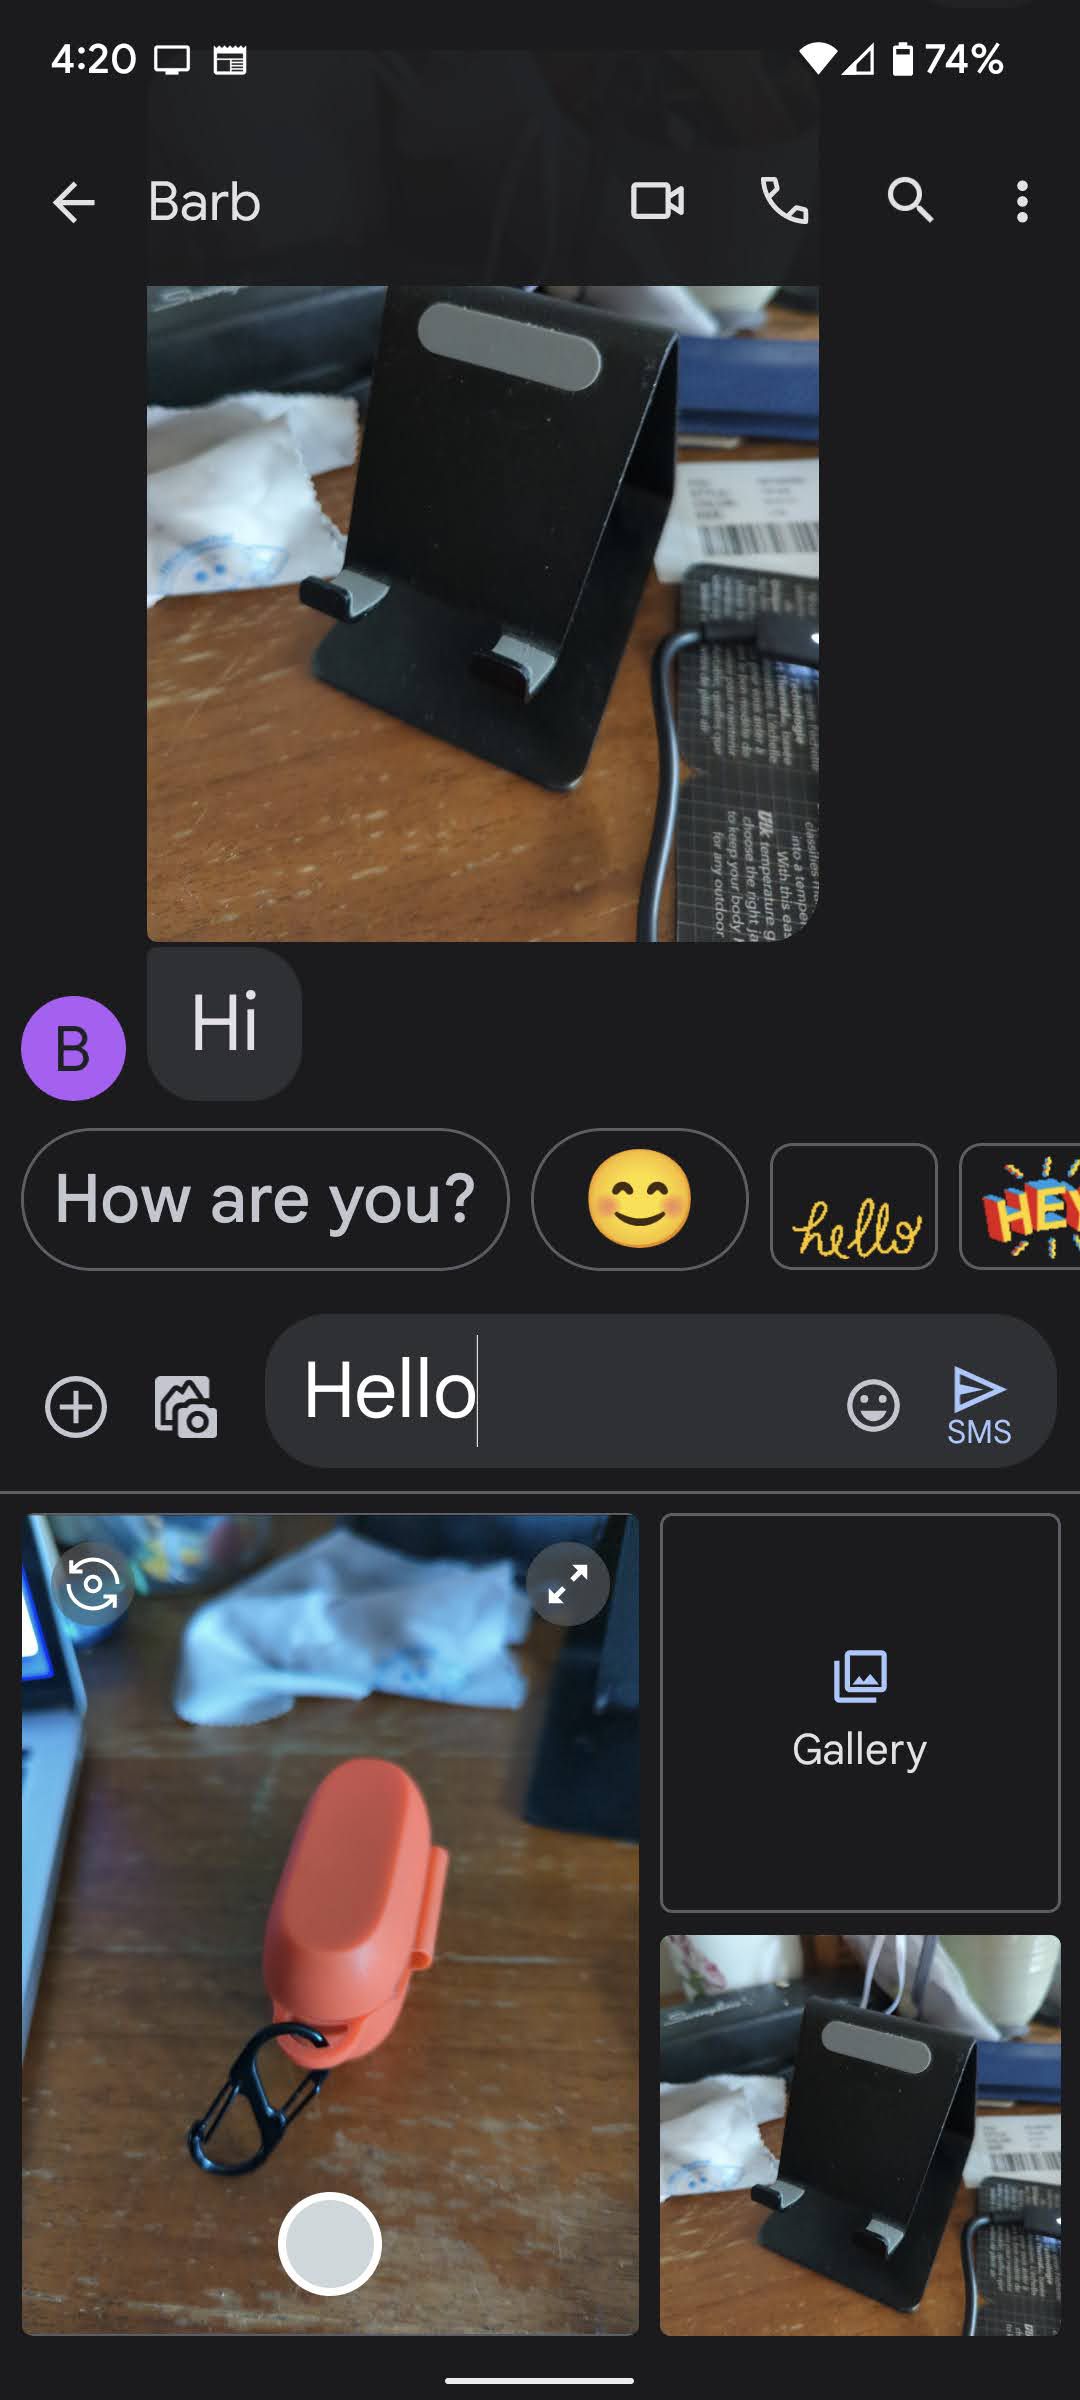 Using the camera to send an image via Messages (see lower-left corner) might keep the camera running.